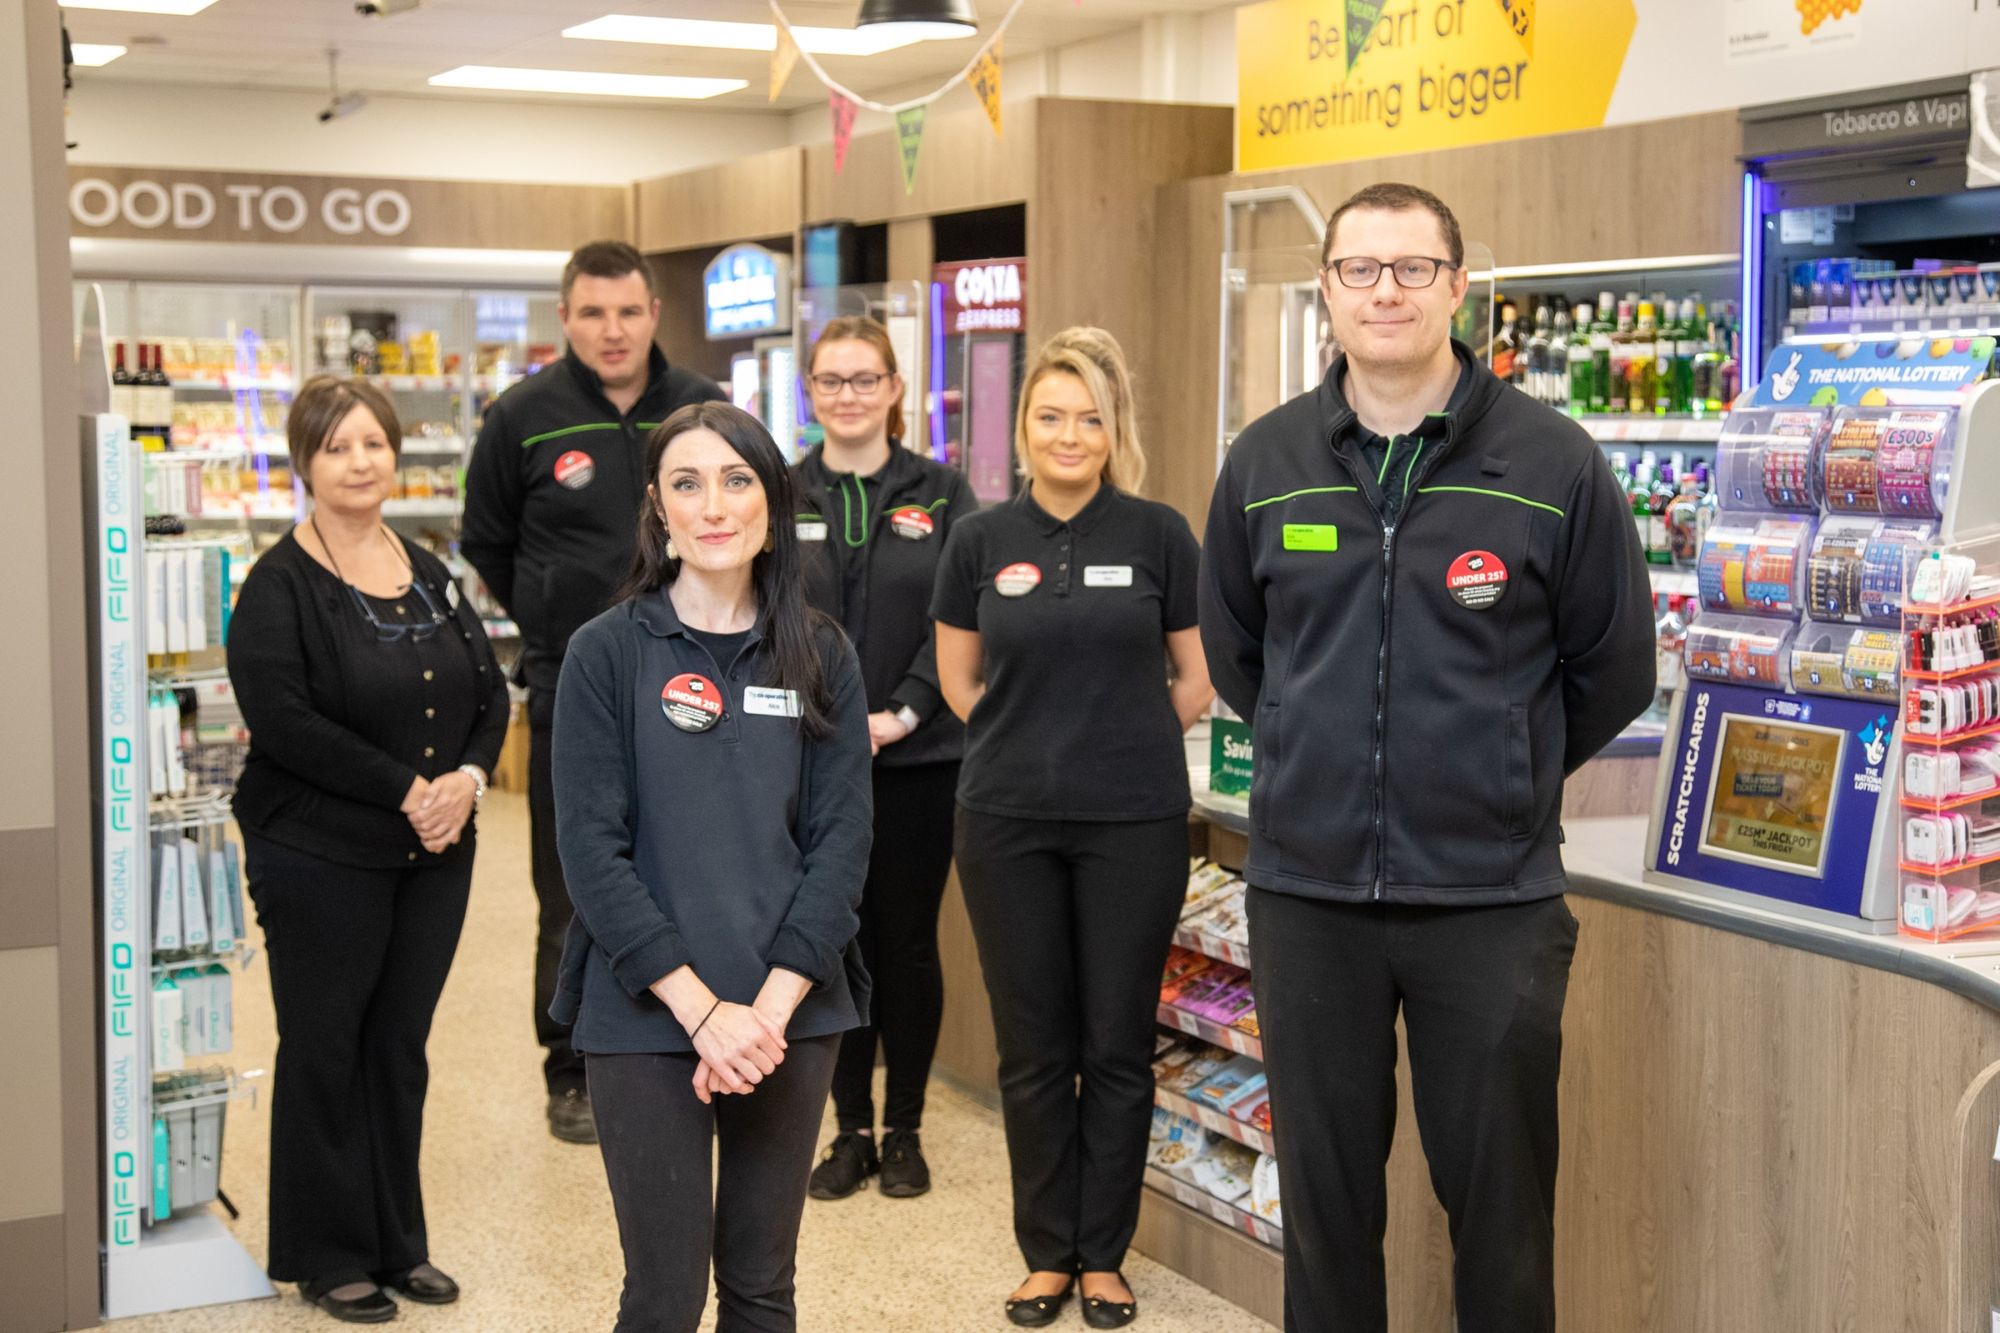 Major investment of almost £118,000 by Central England Co-op brings a brand-new look to Derbyshire food store